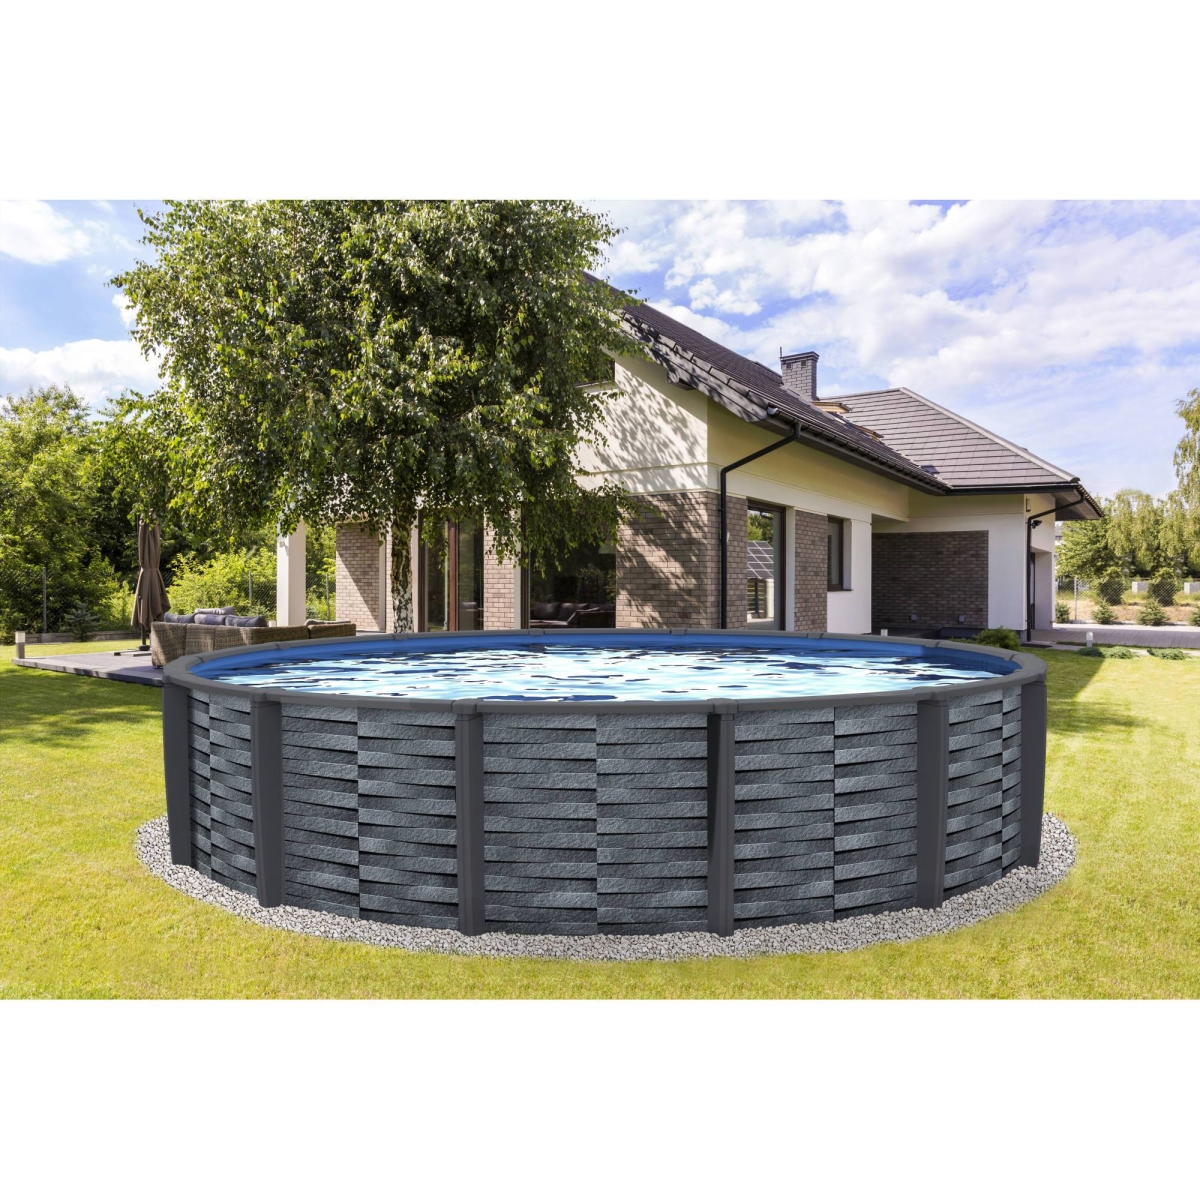 NB19831 24 ft. x 52 in. Pool Affinity Round AG Pool, Gray -  Blue Wave